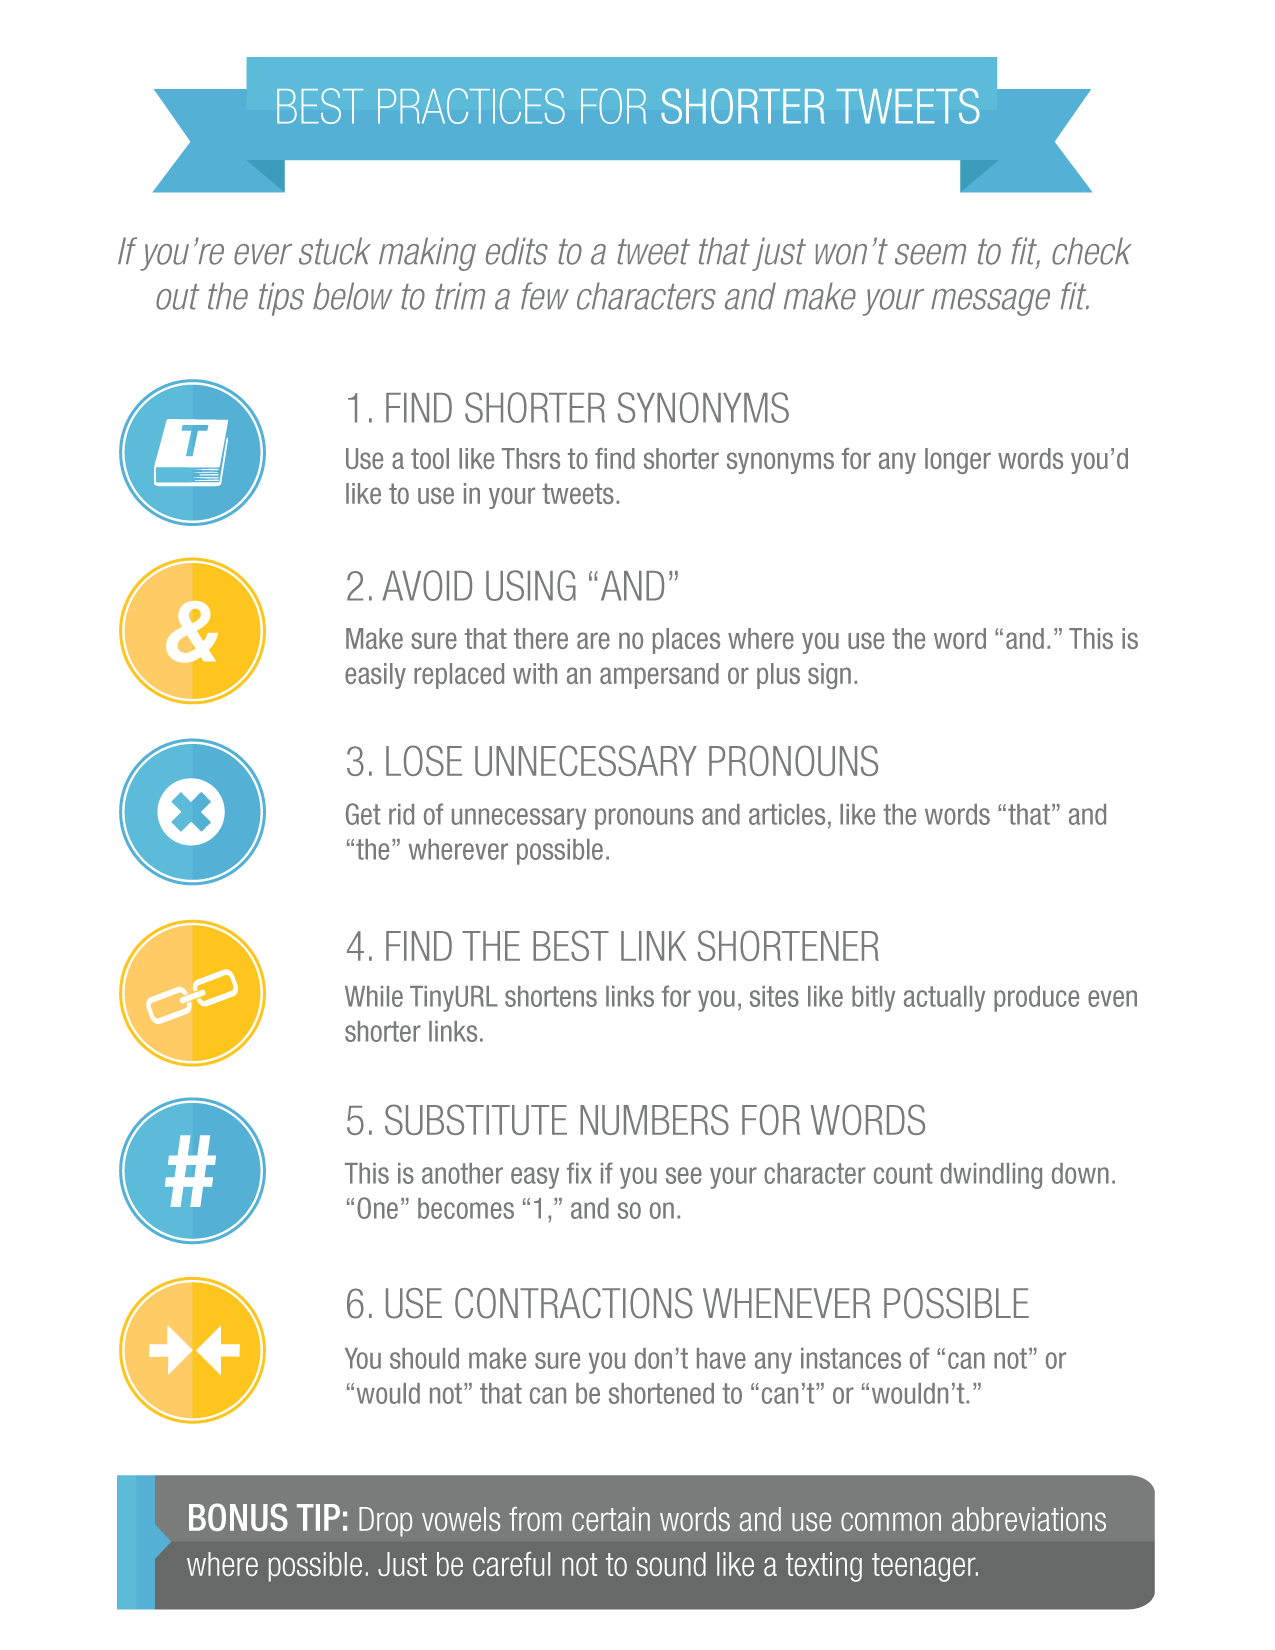 Best Practices For Shorter Tweets - infographic - how to craft/write short tweets